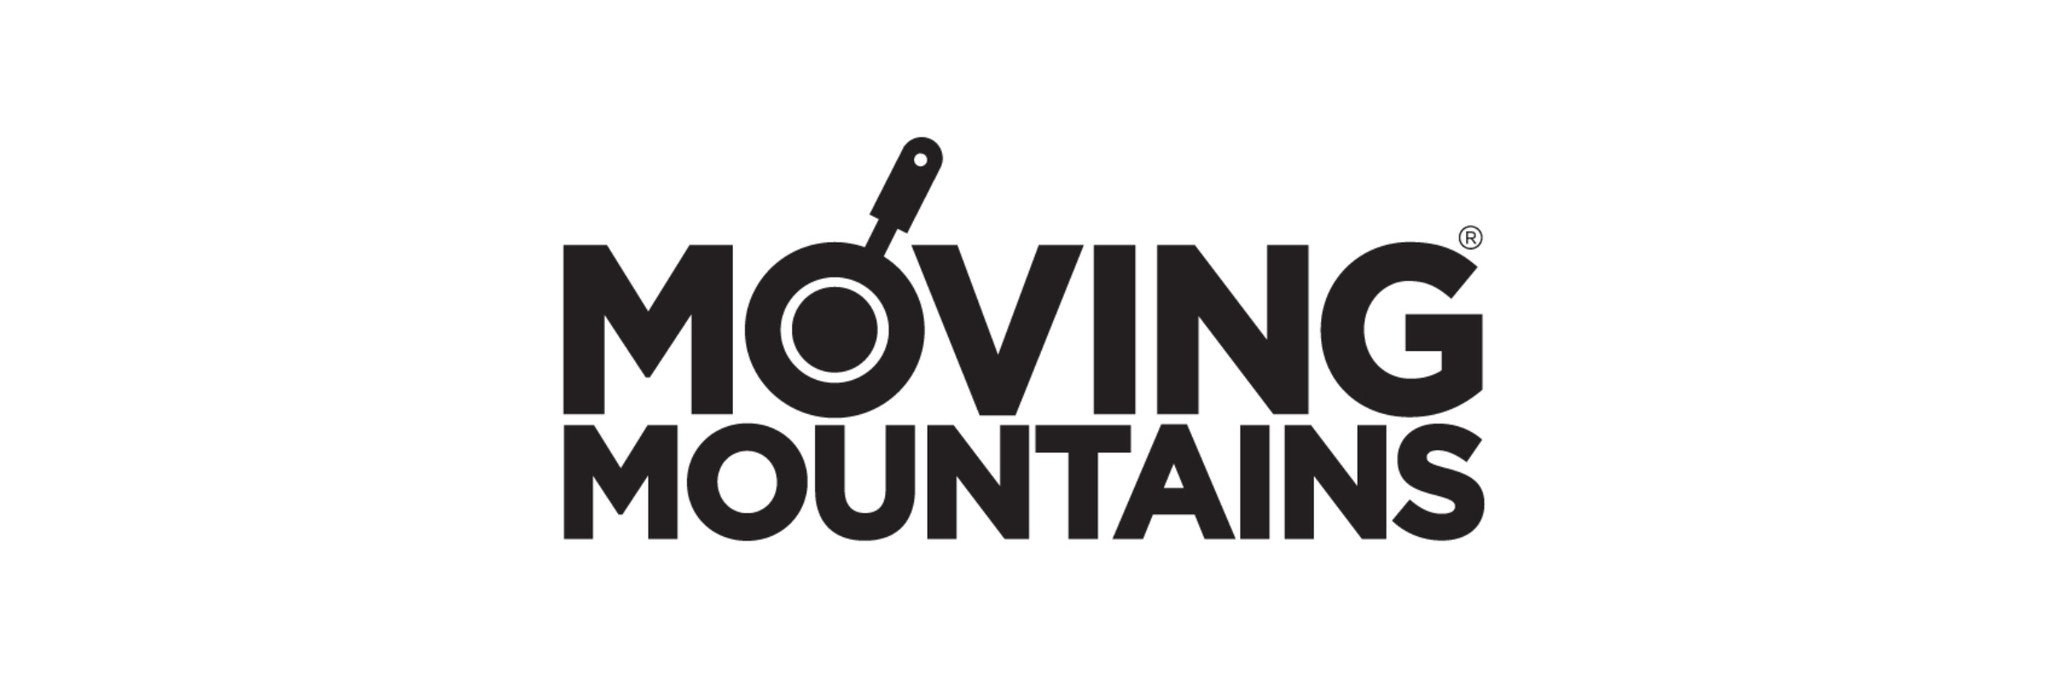 MOVING MOUNTAINS